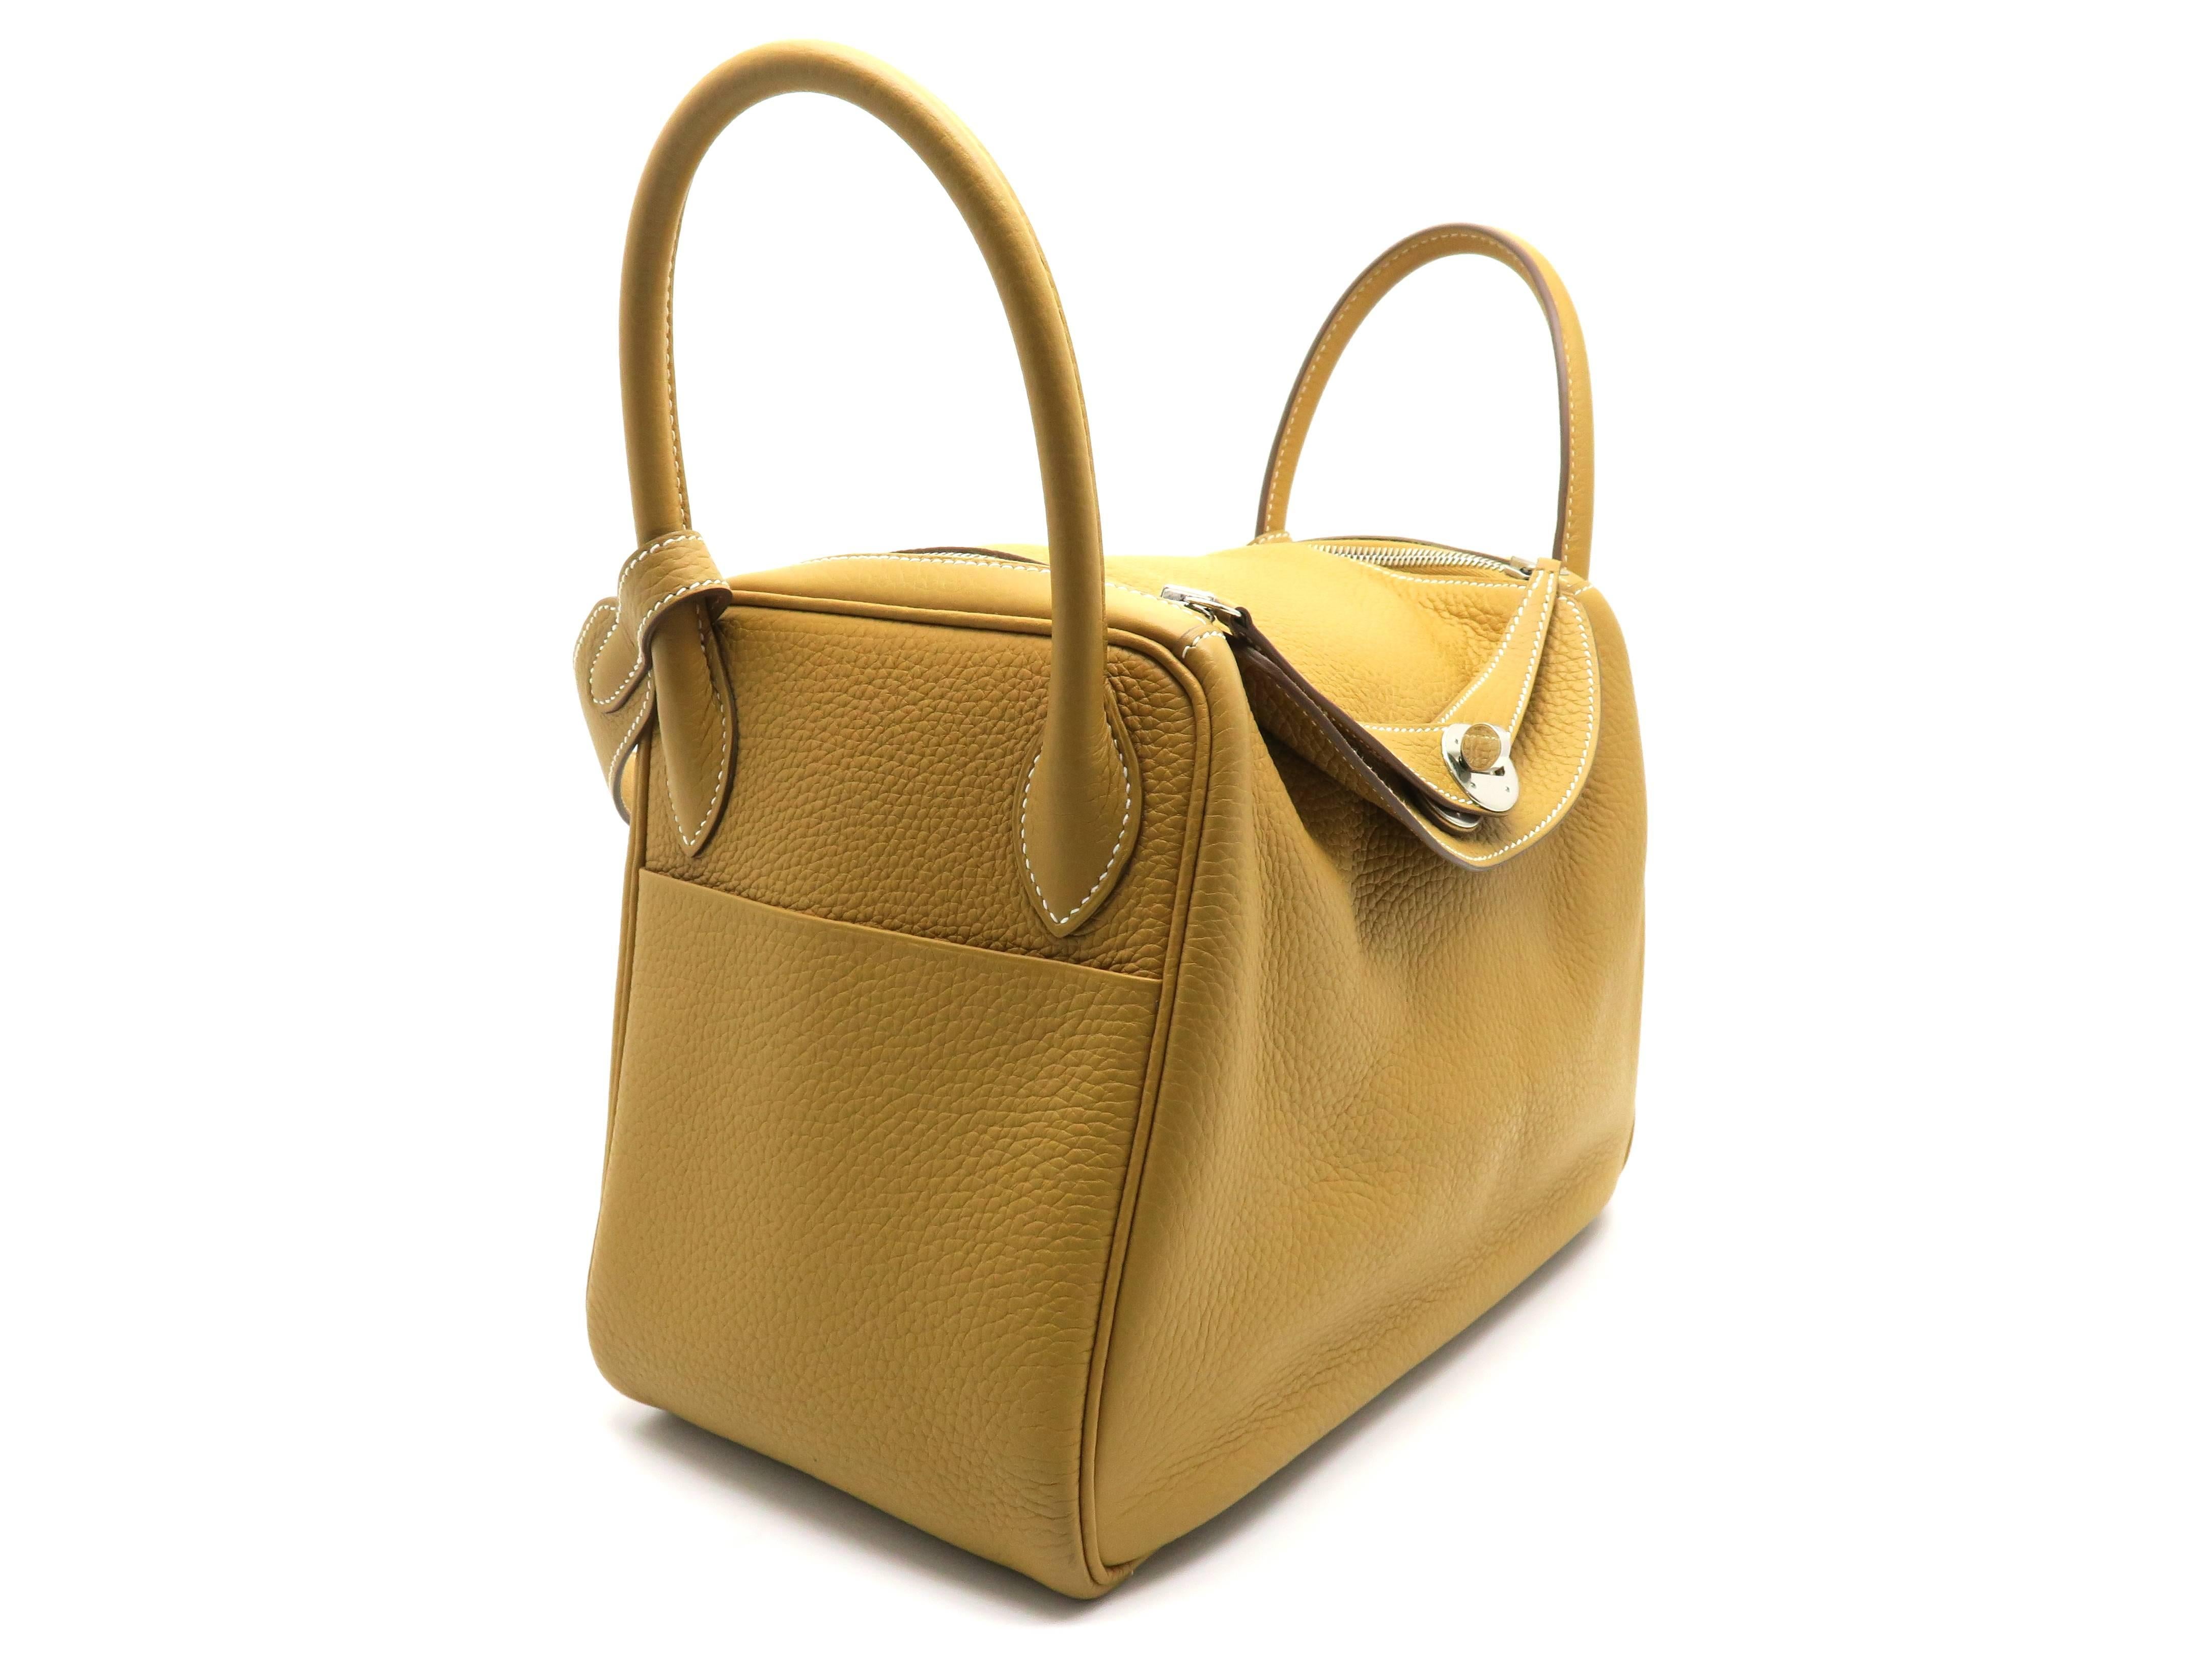 Color: Yellow / Natural Sable (designer color) 

Material: Clemence Leather

Condition: Rank A 
Overall: Good, few minor defects
Surface: Minor Stains
Corners: Minor Stains
Edges: Good
Handles/Straps: Good
Hardware: Good

Dimension: W30 × H19 ×